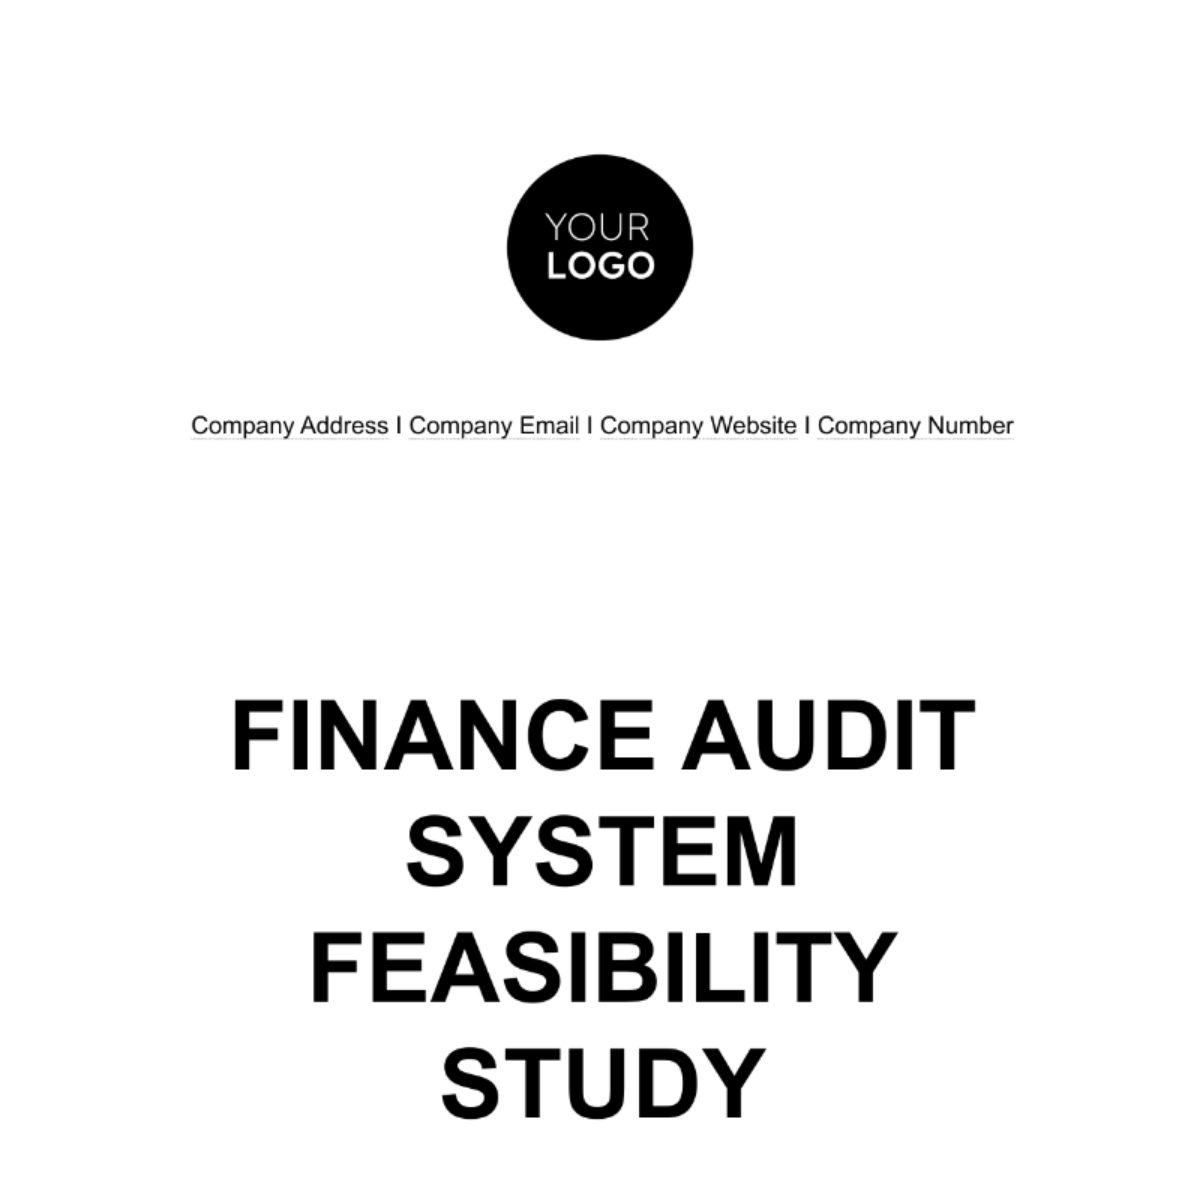 Free Finance Audit System Feasibility Study Template